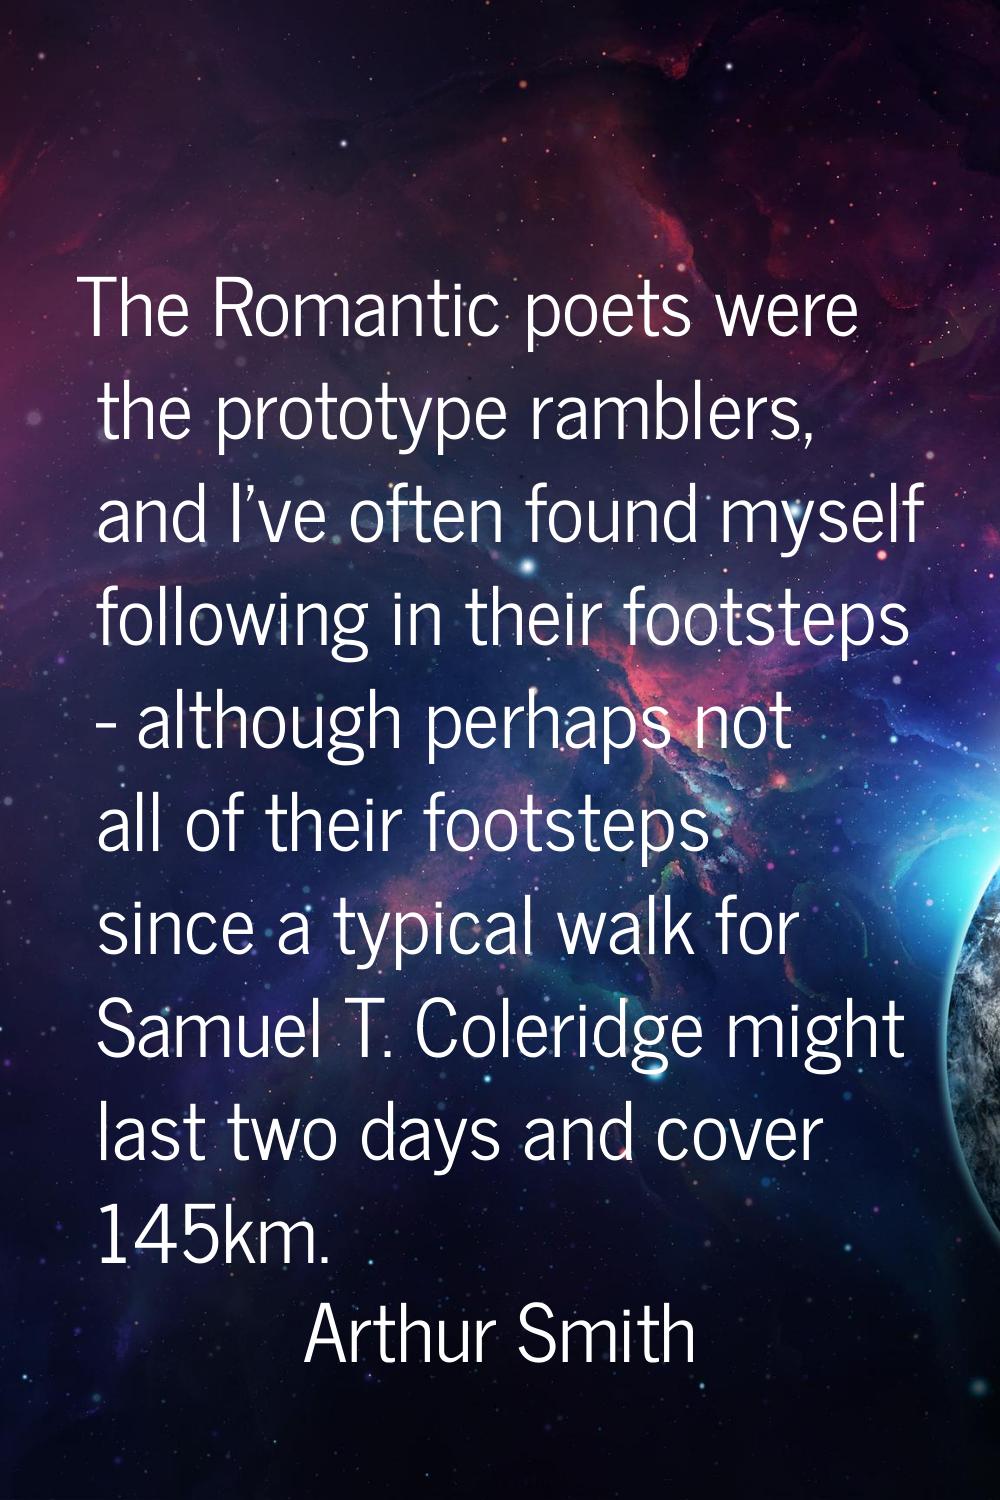 The Romantic poets were the prototype ramblers, and I've often found myself following in their foot